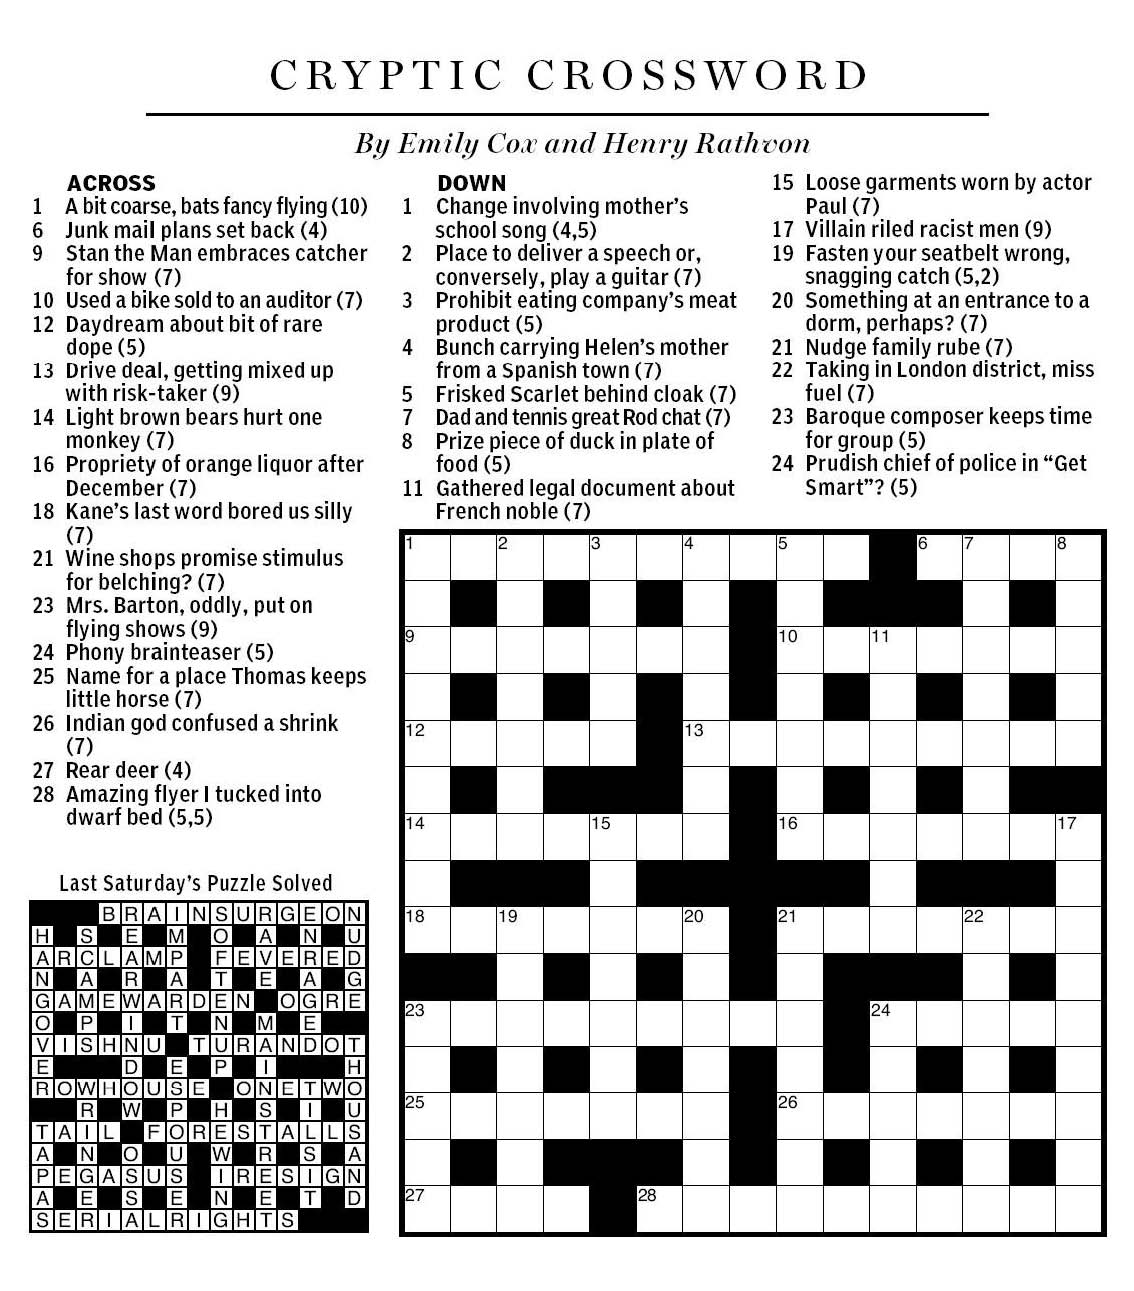 National Post Cryptic Crossword Forum: Saturday, July 6, 2013 — Air Show